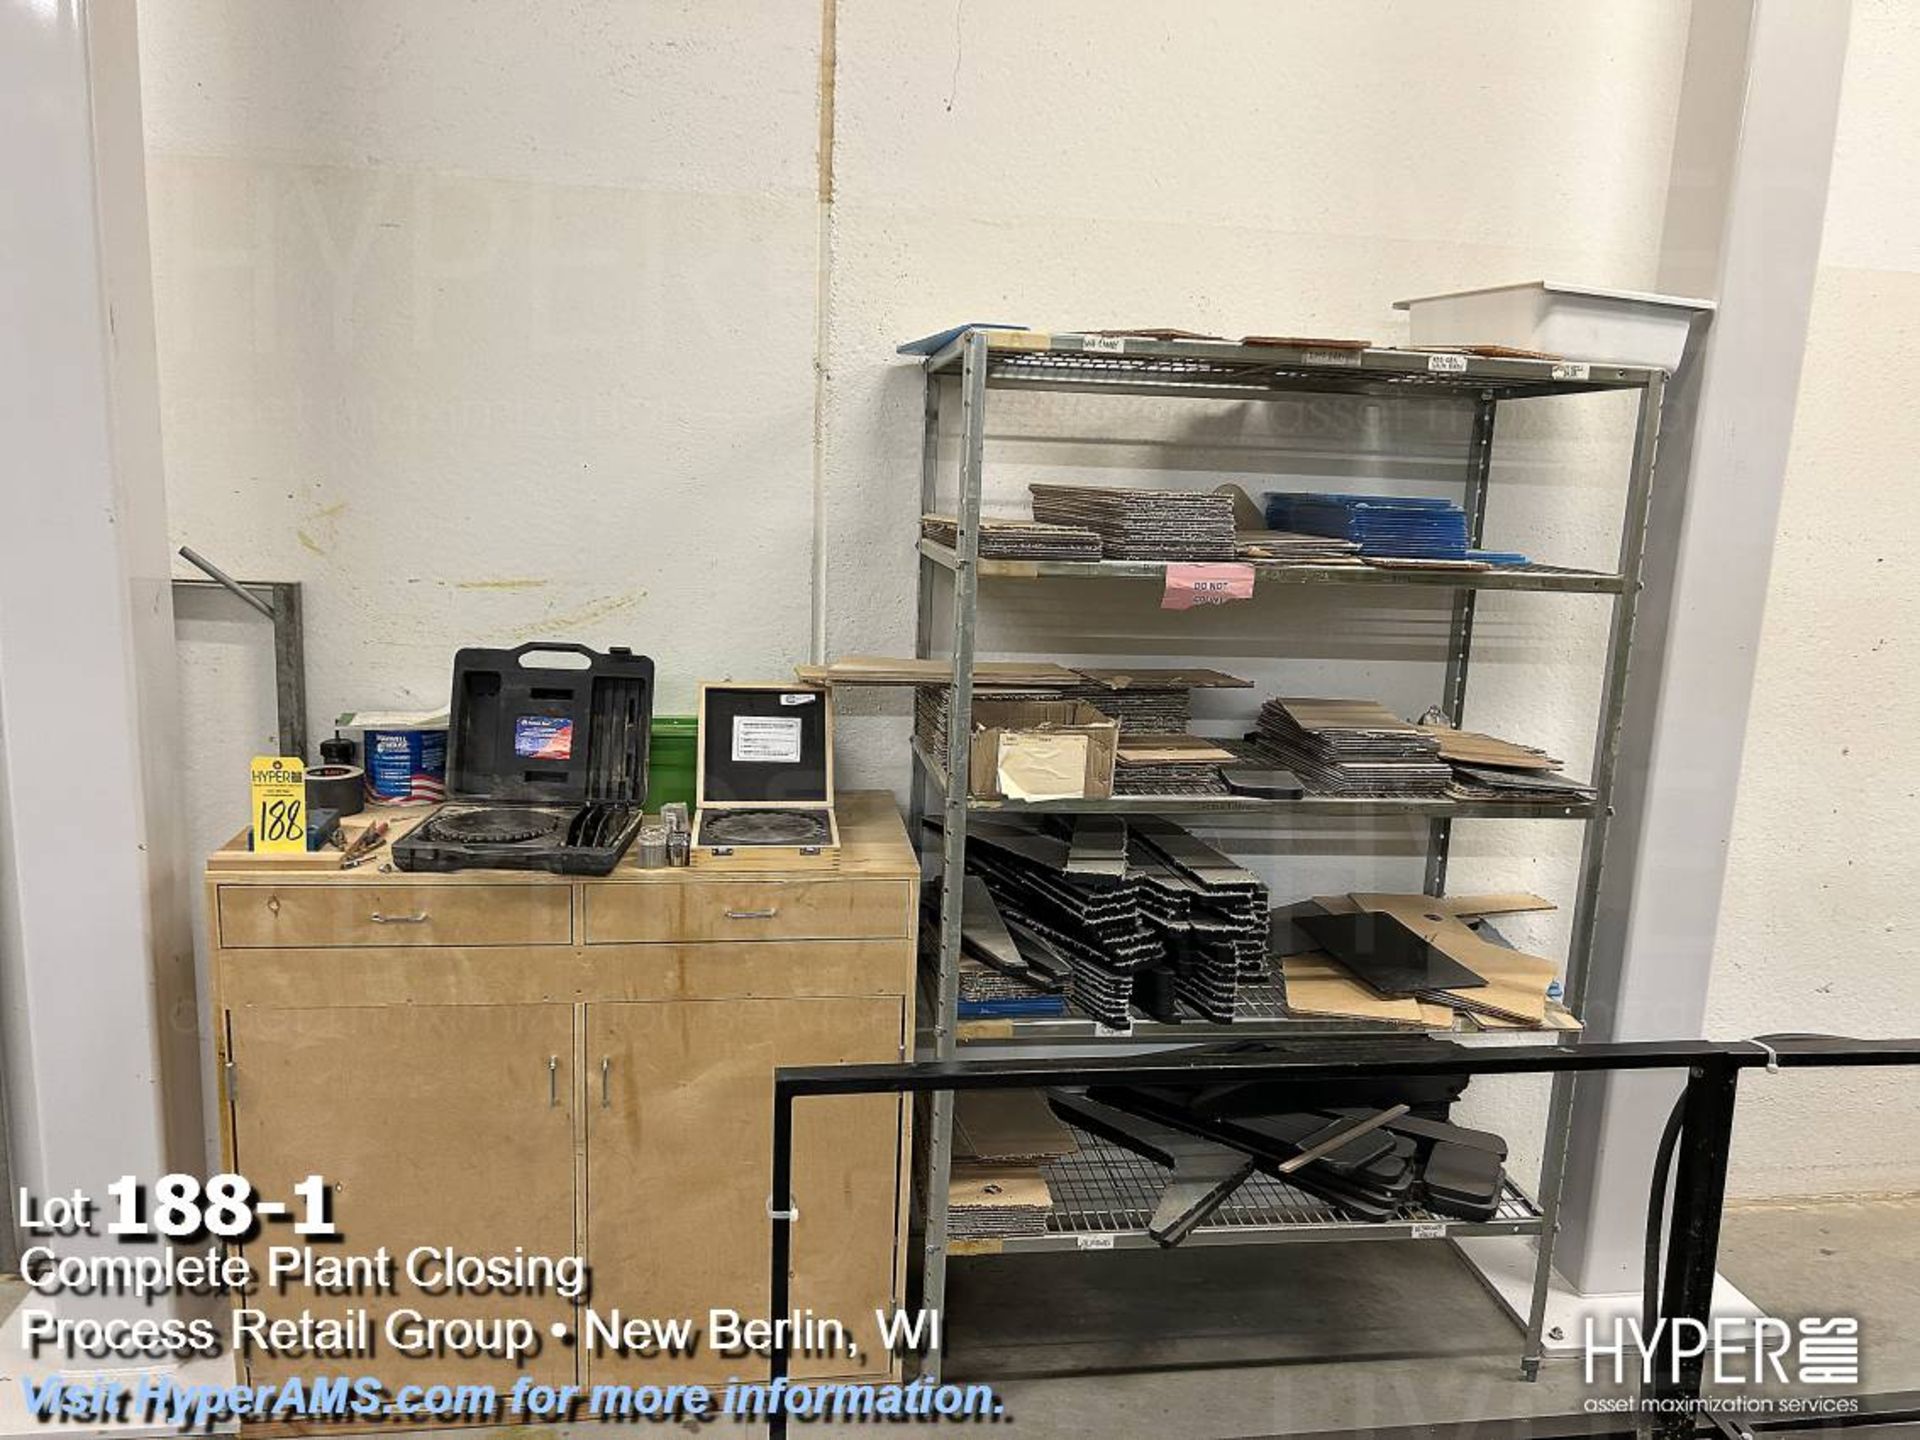 Lot: Biesse tooling, saw blades, collets, tool vise with shelf, and cabinet